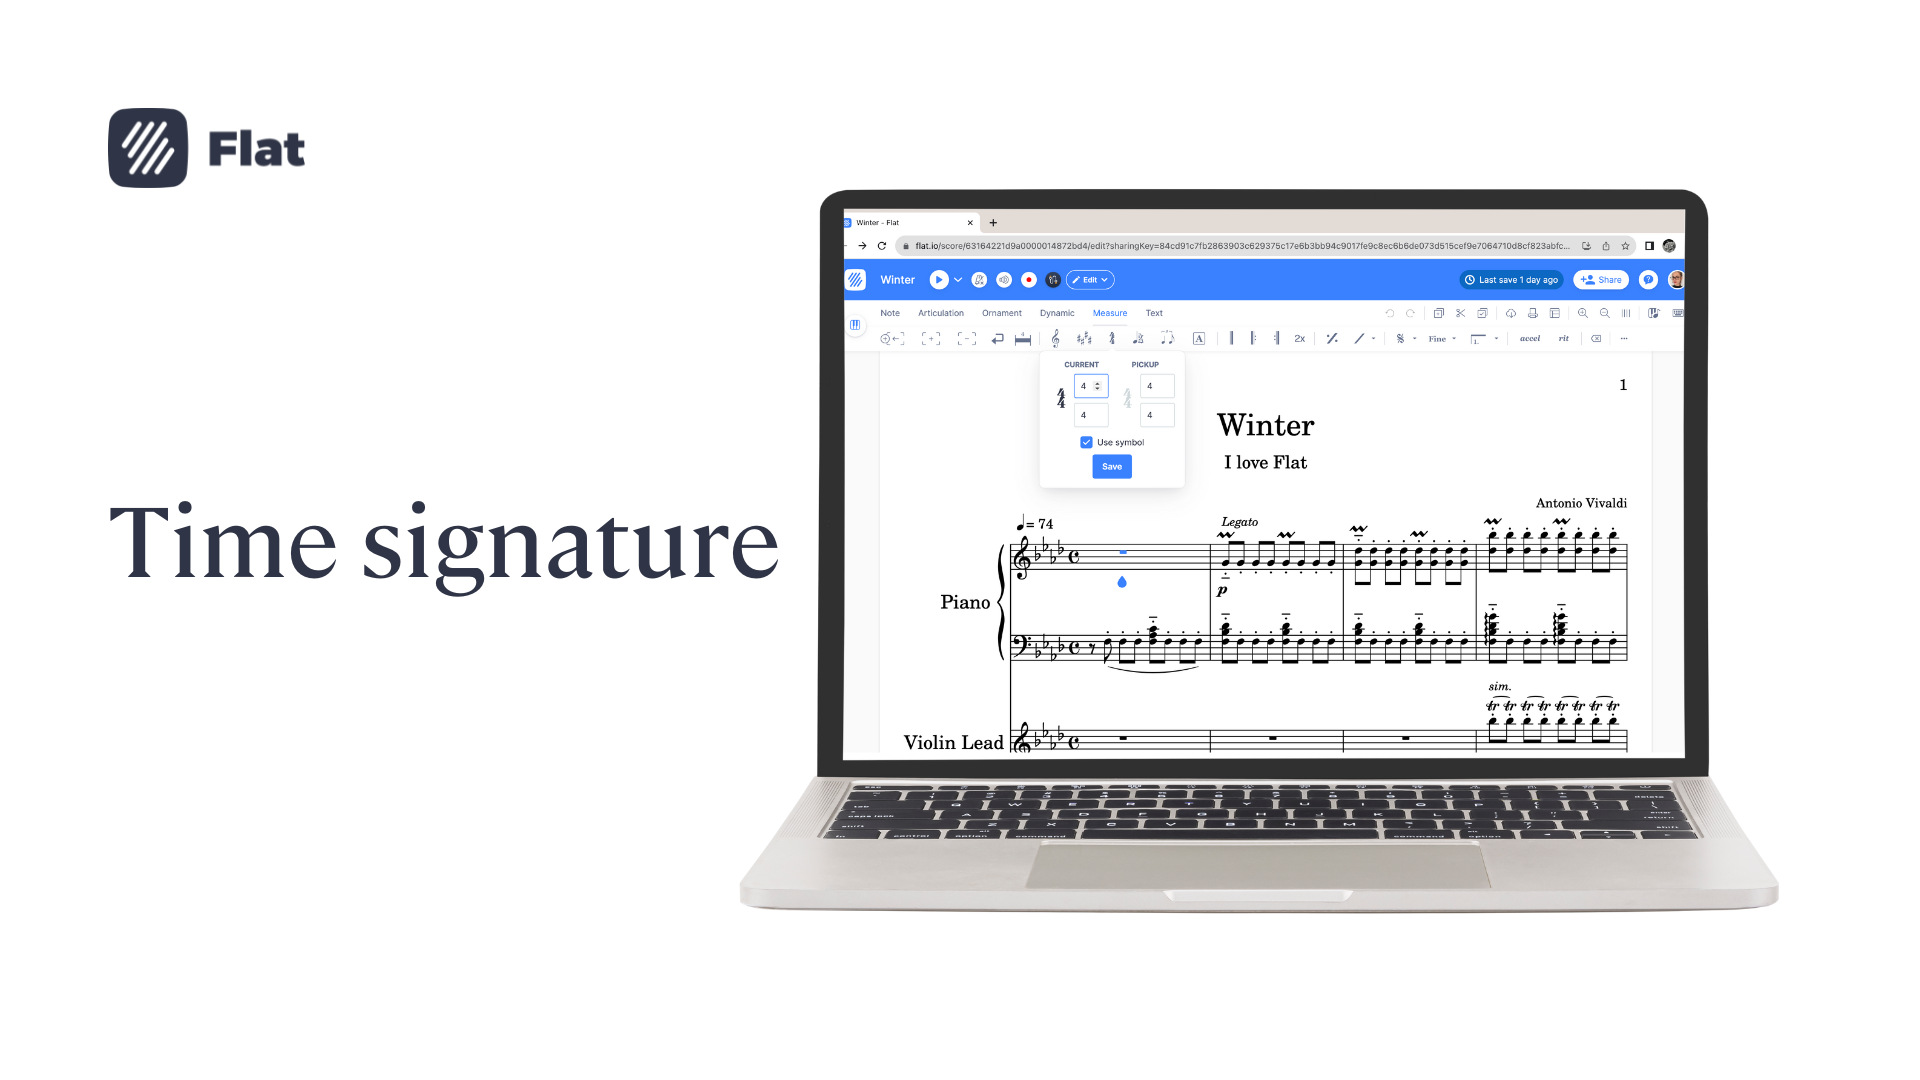 How to use the time signature